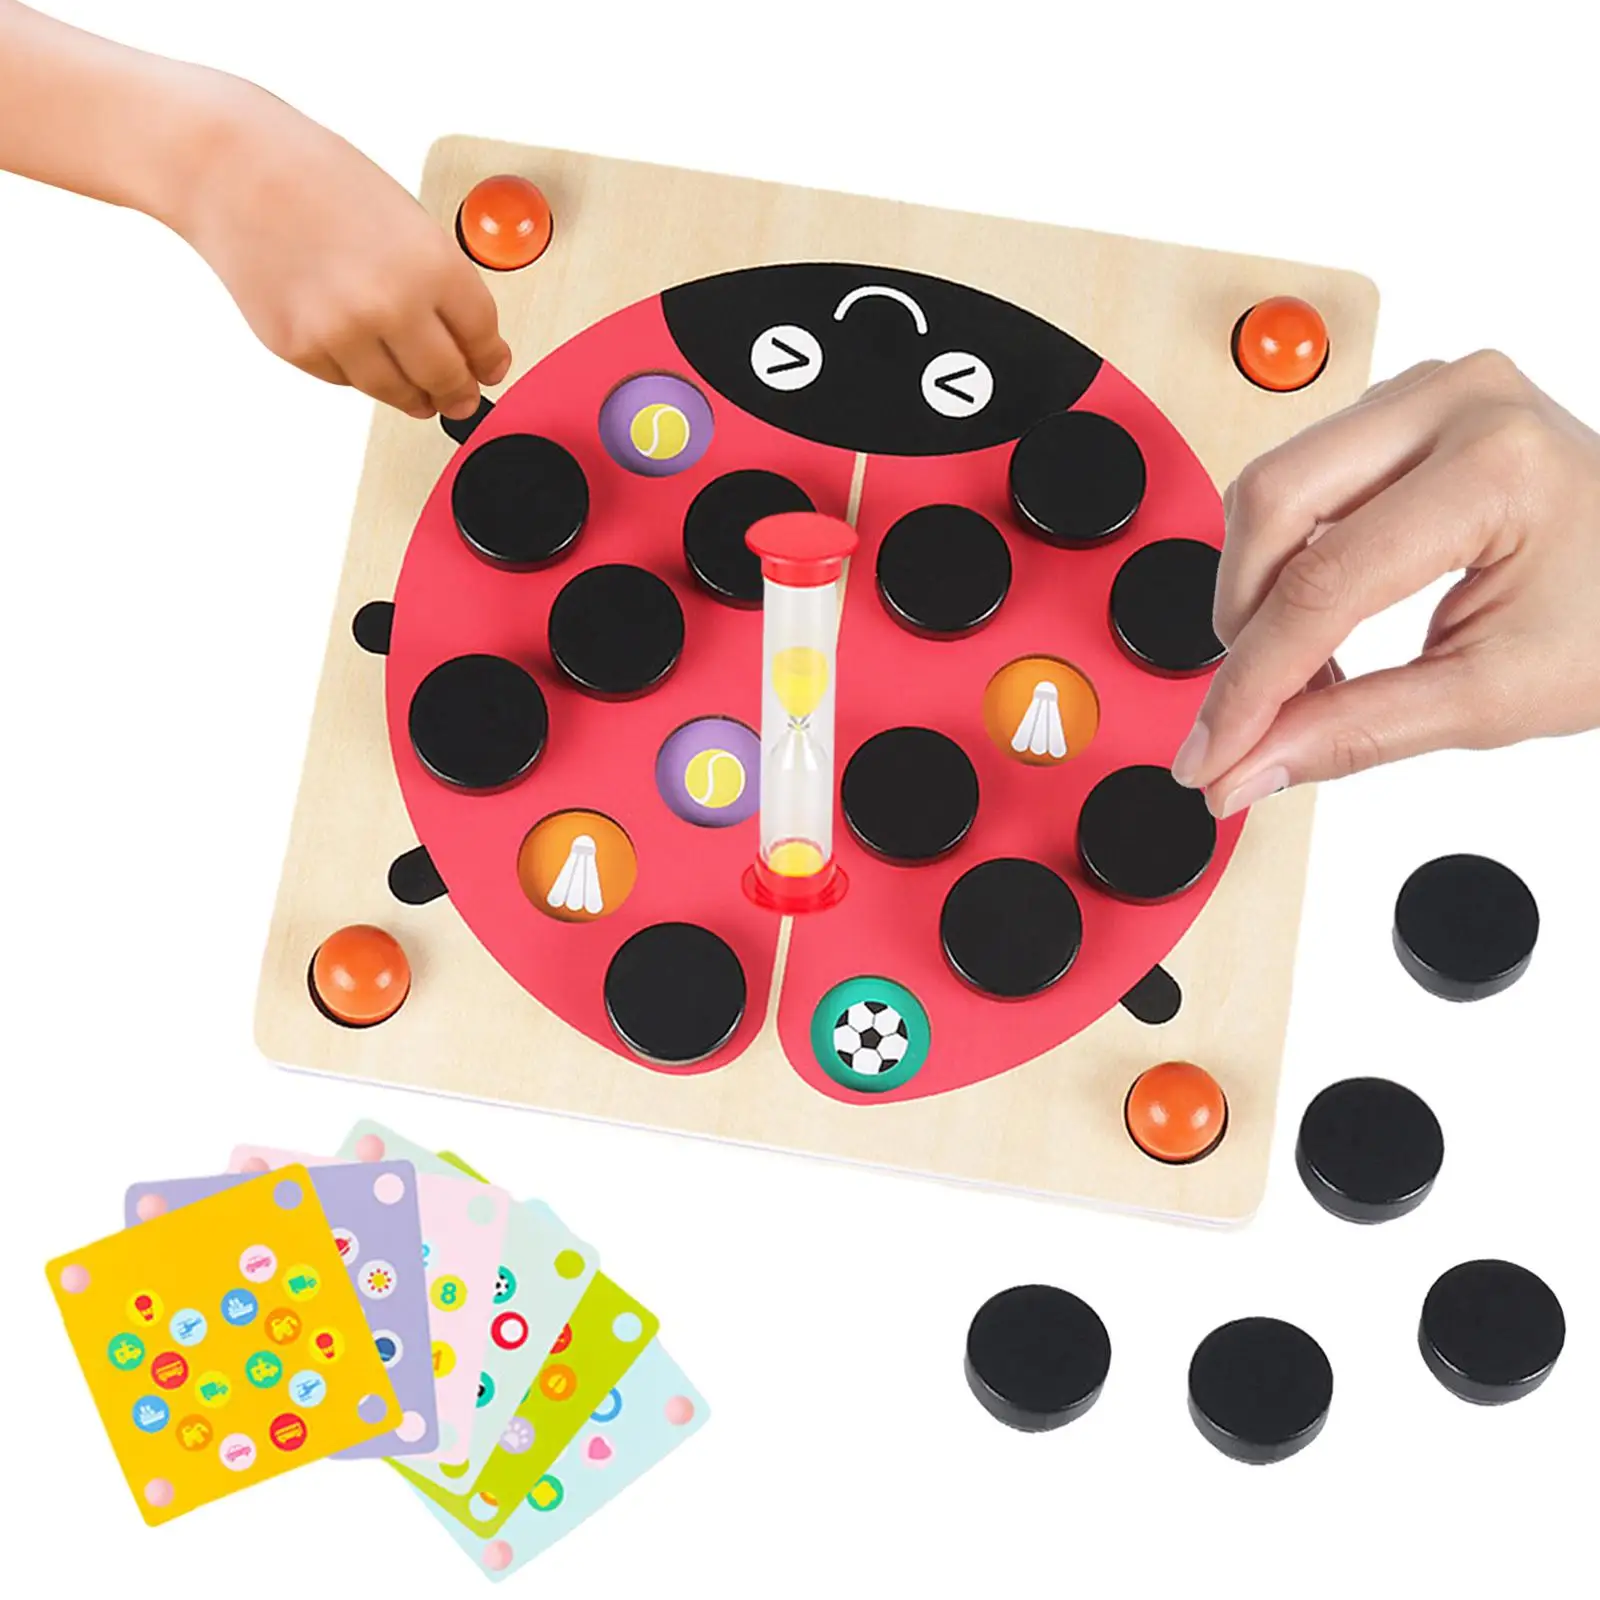 

Wooden Memory Chess Game Educational Toy Beetle Memory Game Family Board Game for Children Girls Boys Preschoolers Preschool